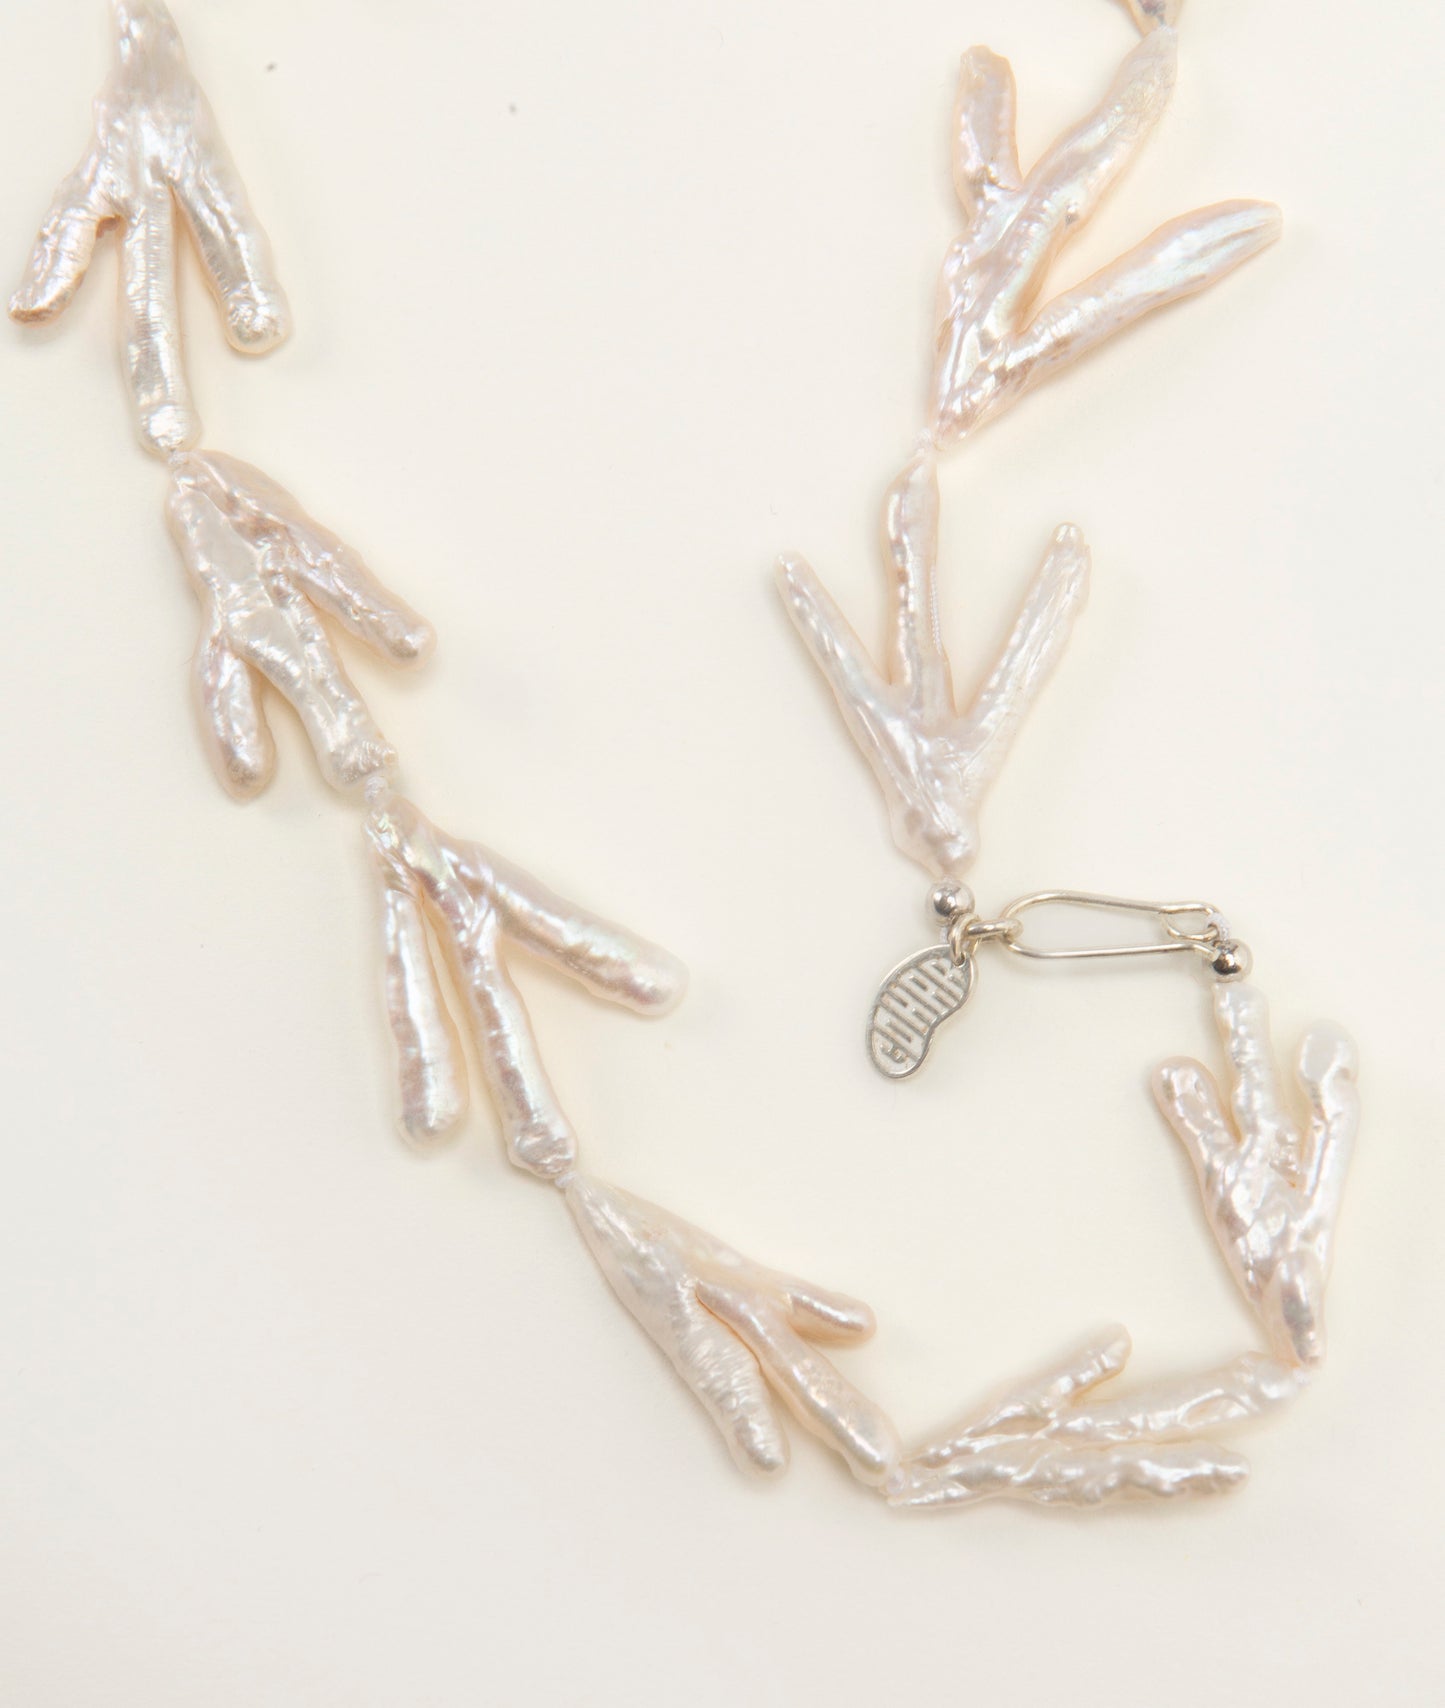 Host Necklace with Chicken Feet Pearls